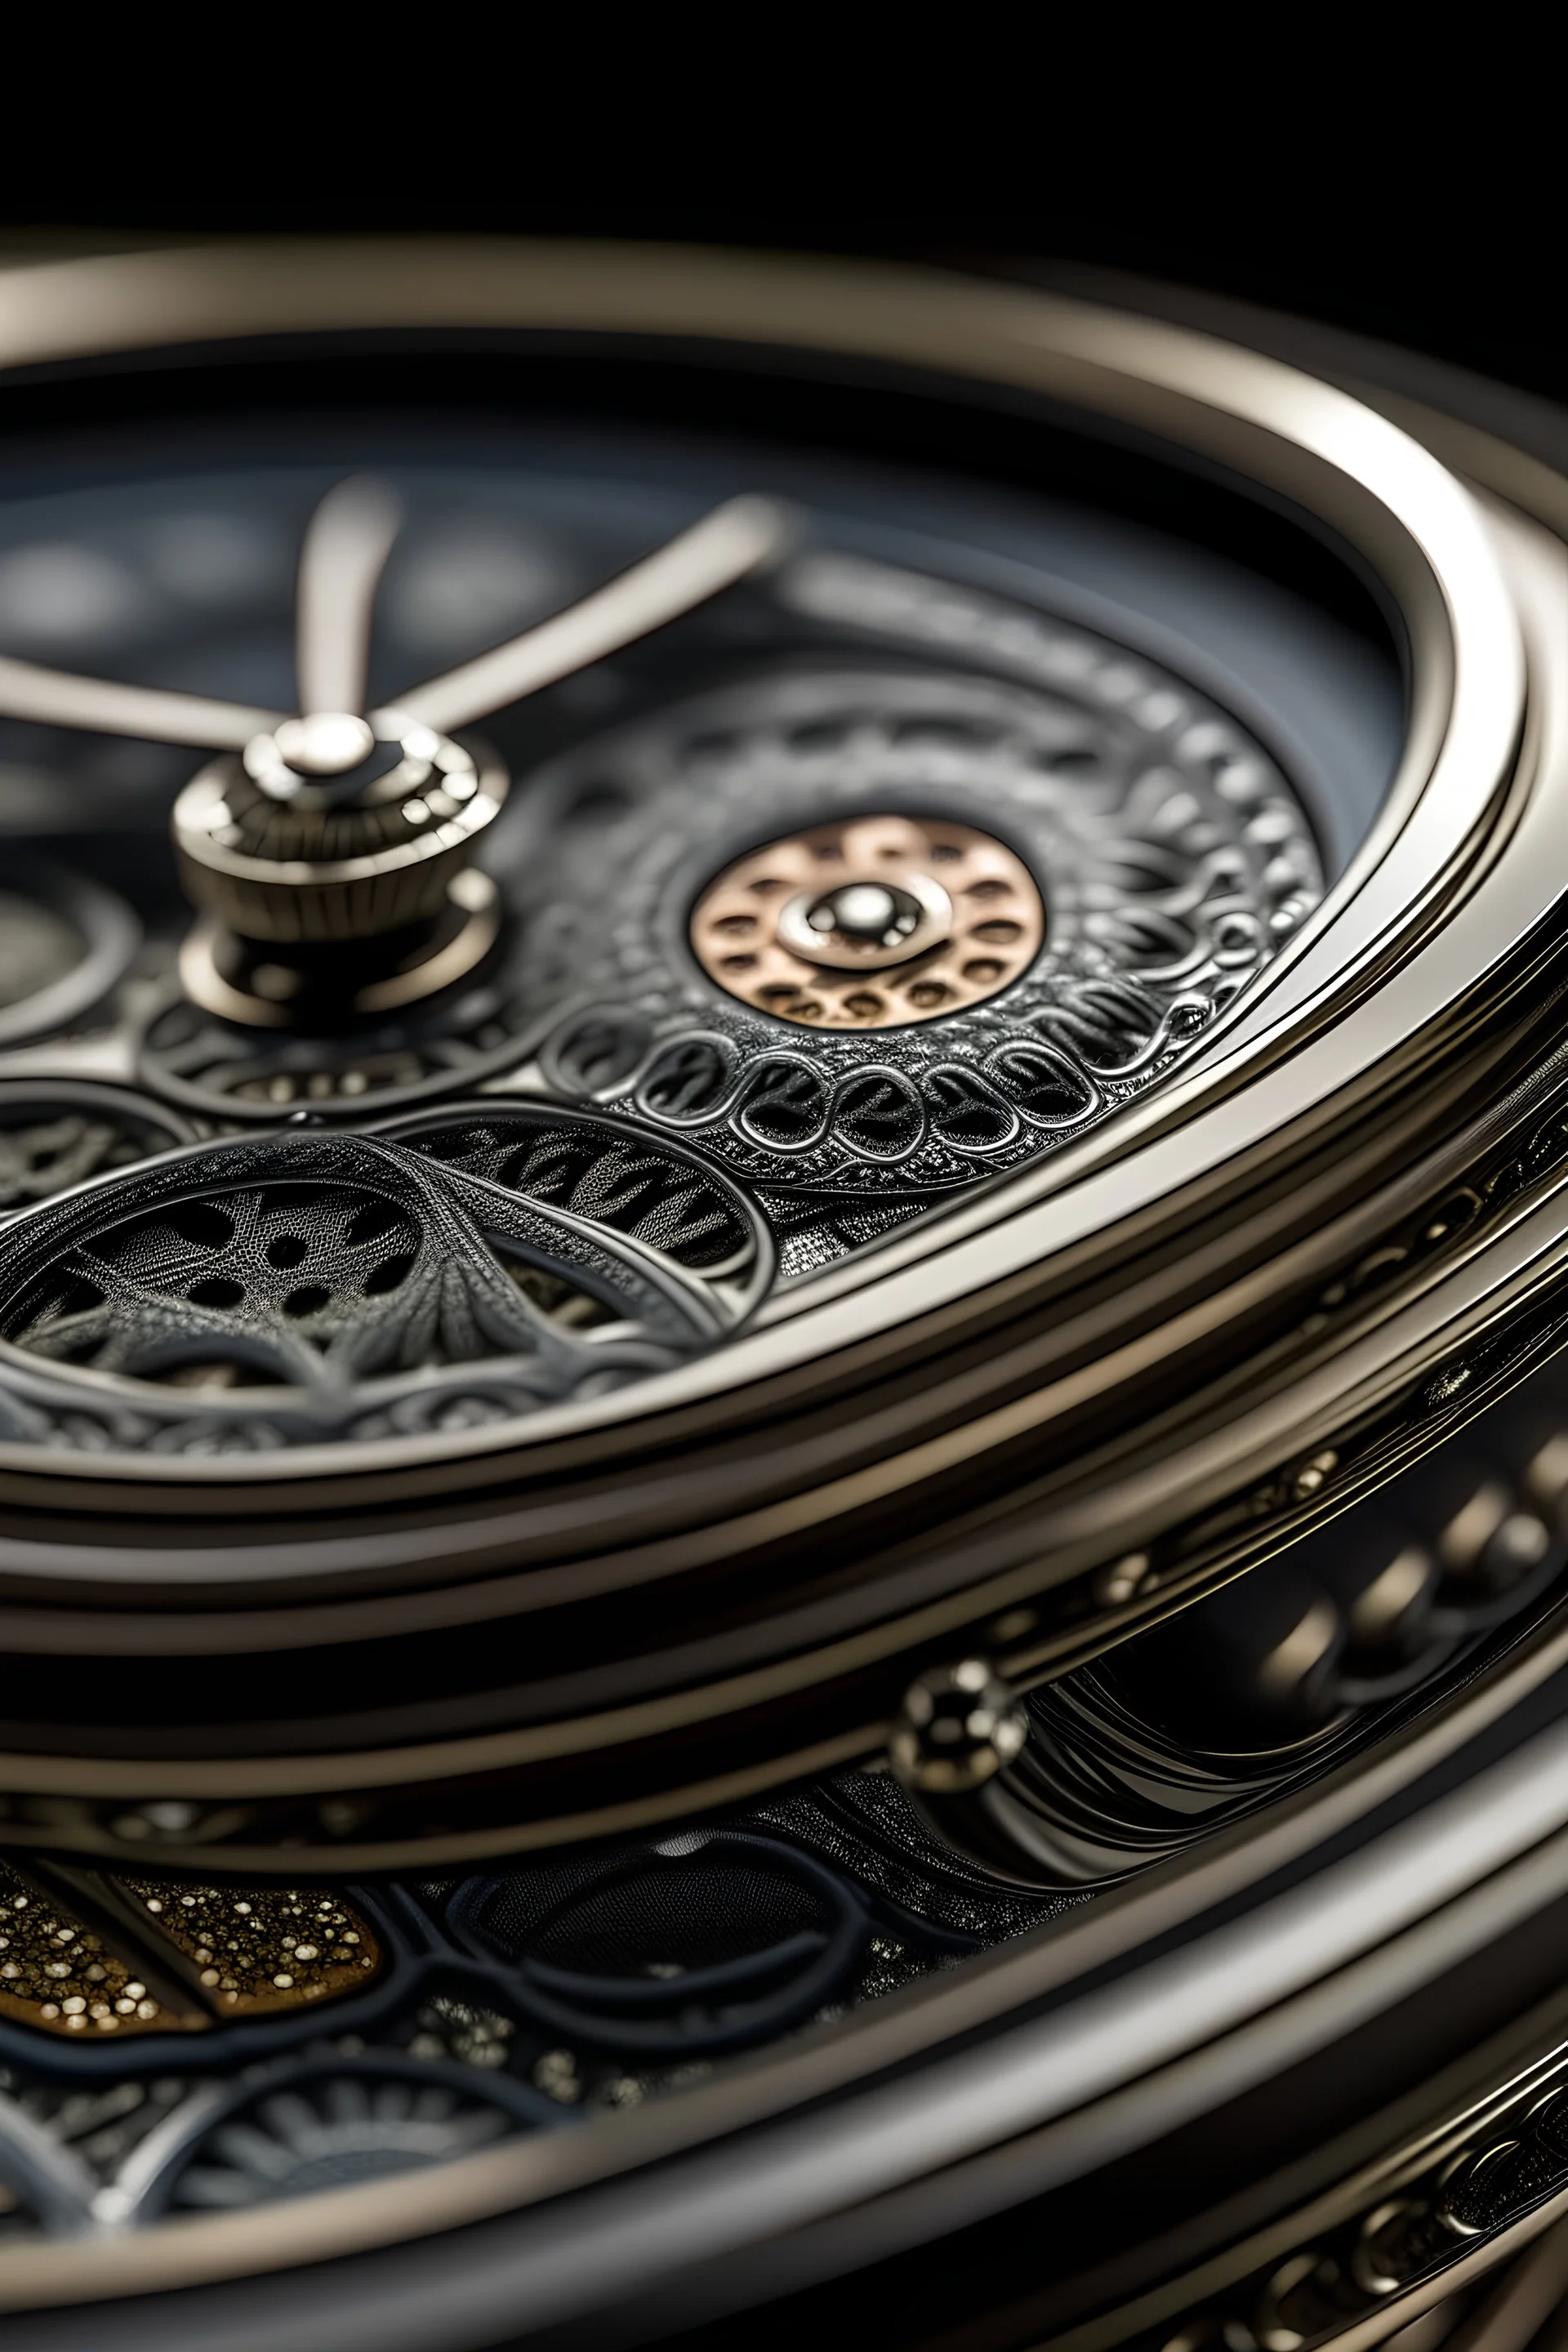 Request a close-up macro image that highlights the precision and detail of the watch's craftsmanship, focusing on the intricate details of the dial, hands, and markers.